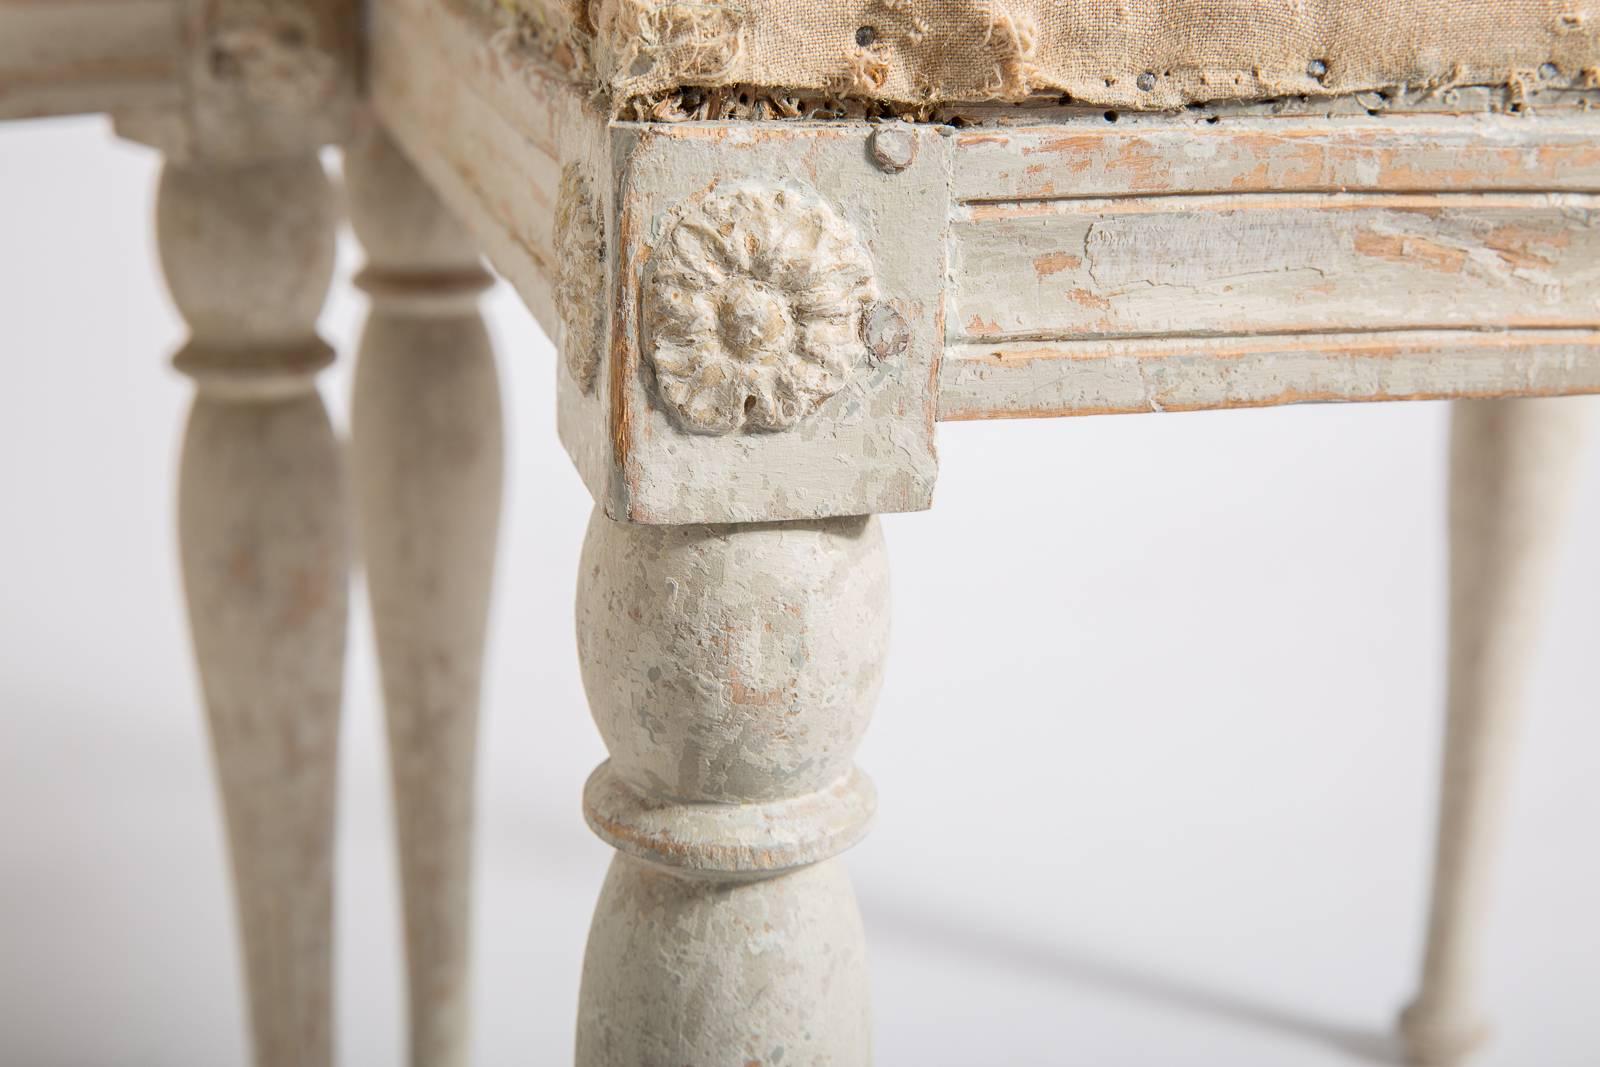 These Swedish Gustavian period stools retain the original pale grey paint surface. The apron has carved medallions on each corner that are typical of the period. The simple legs end in a pad foot. They have been recovered in a white French linen